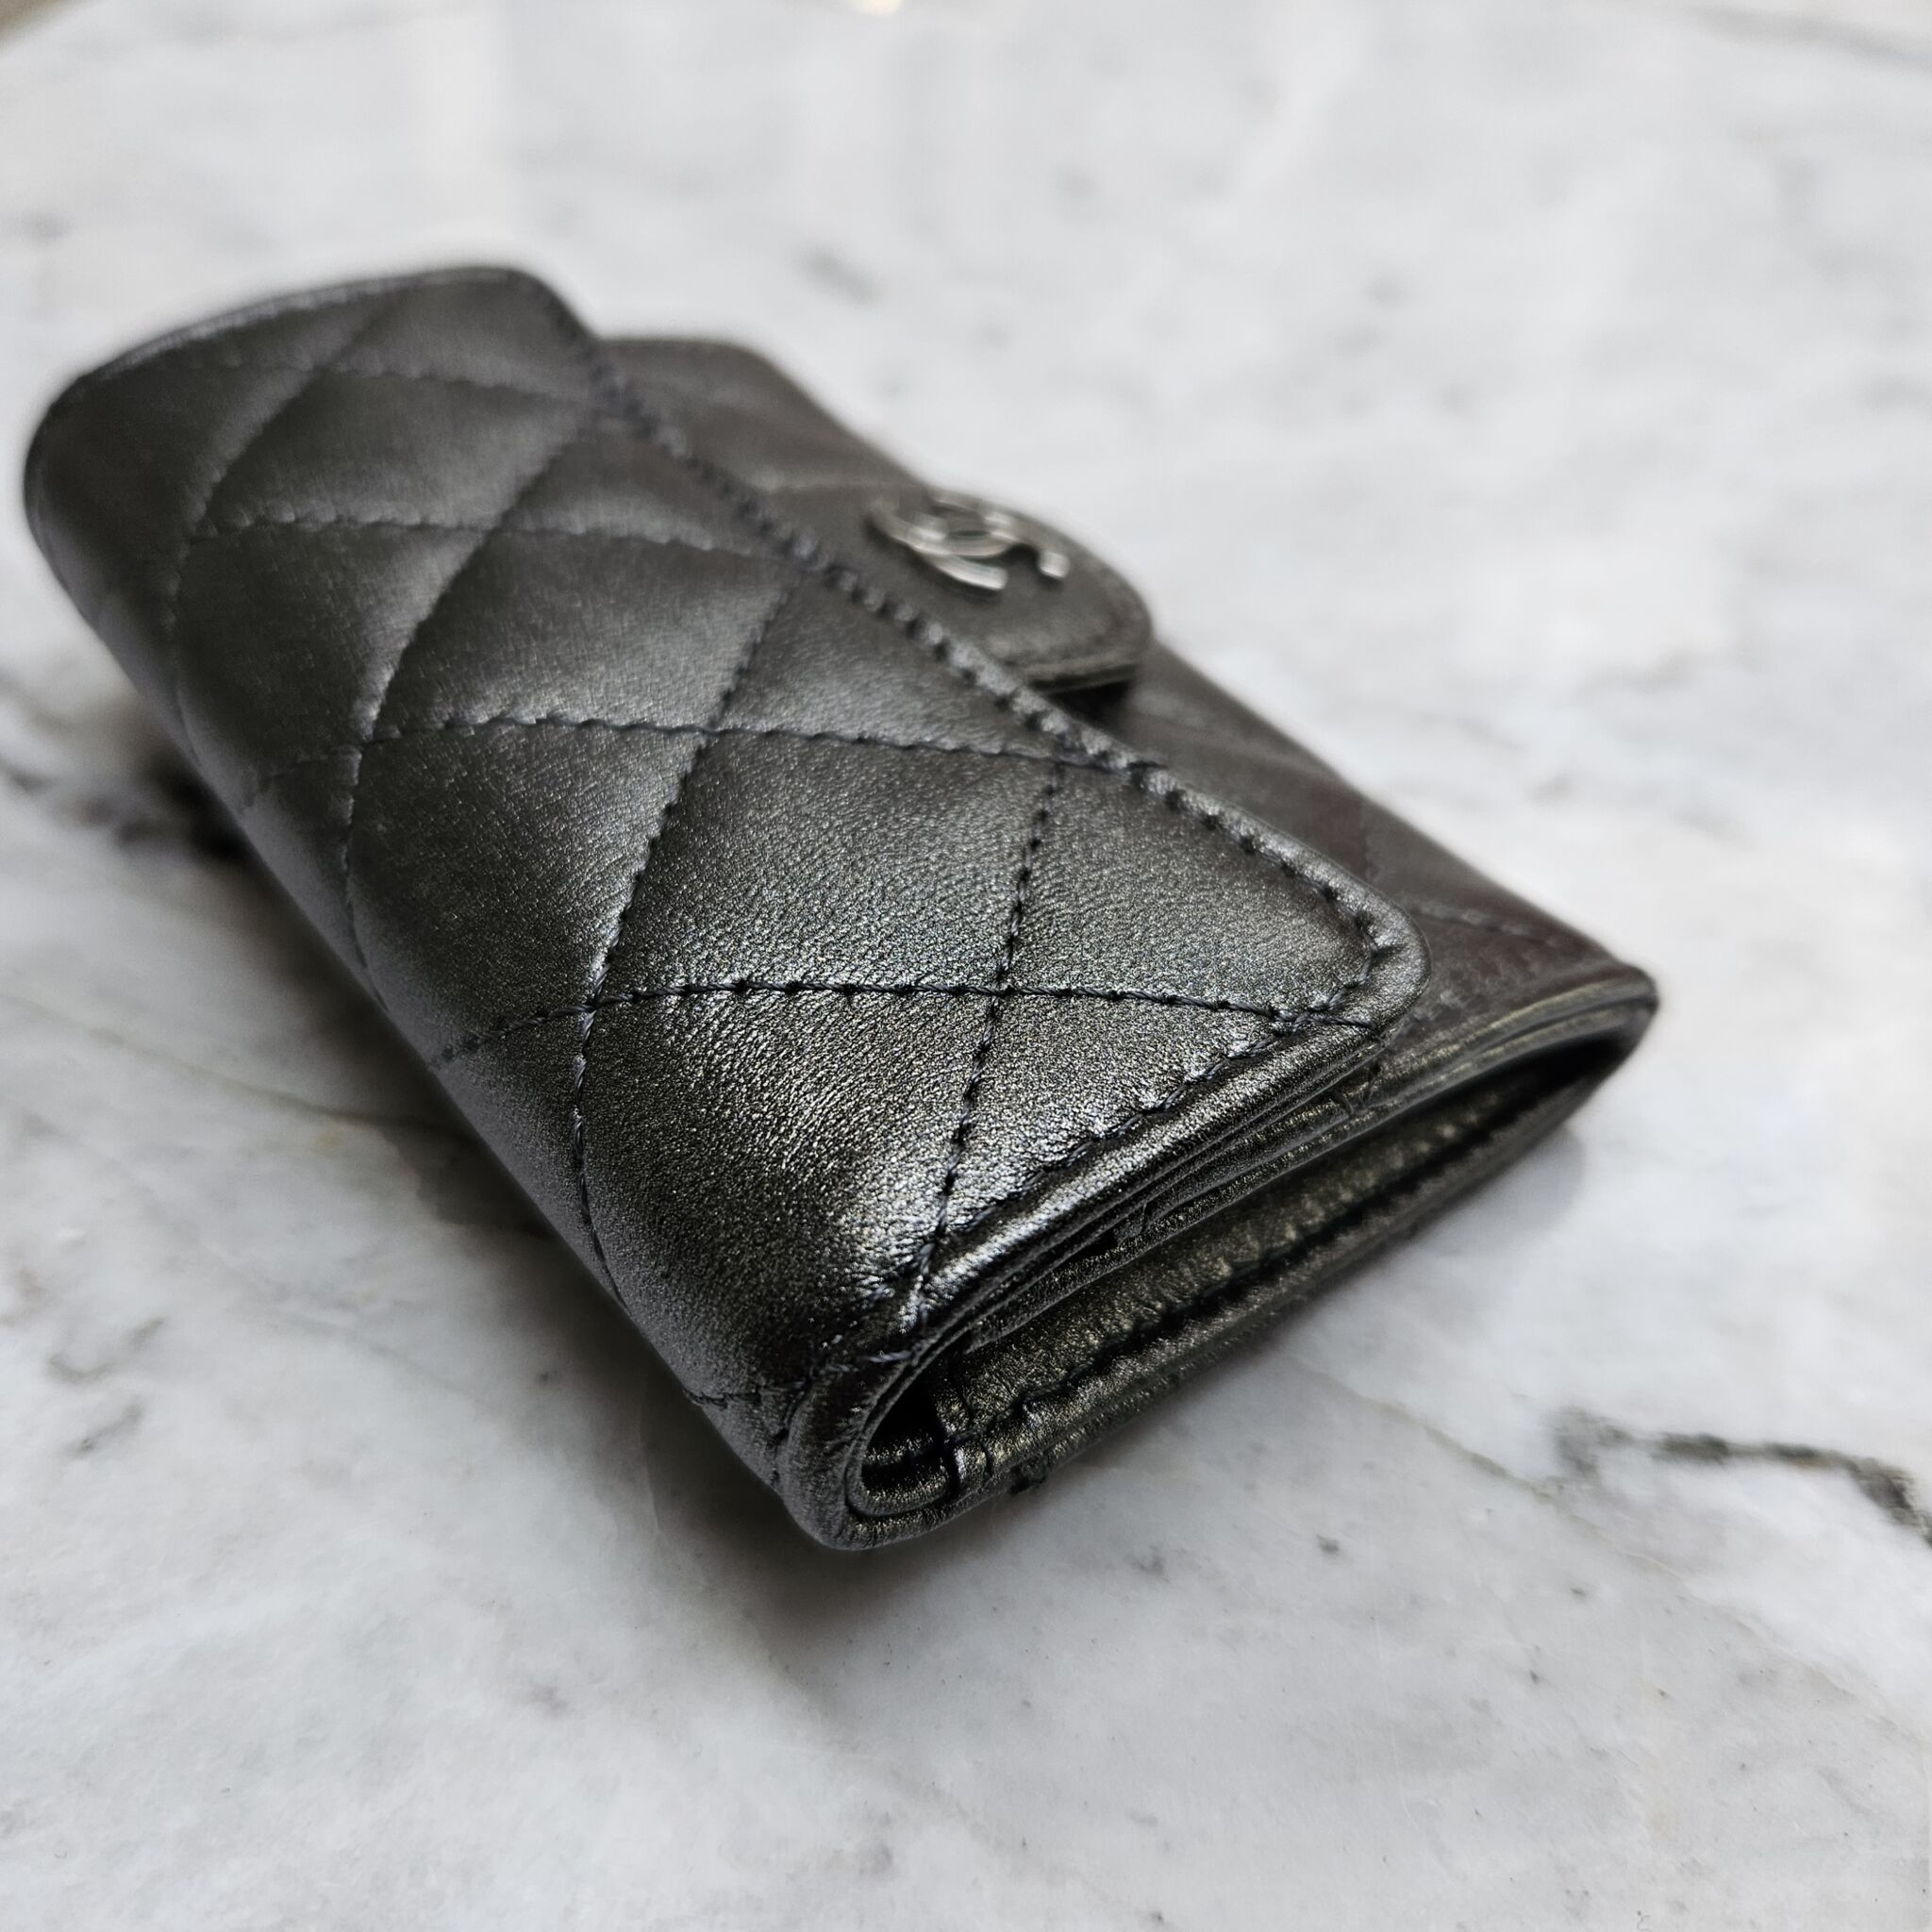 Chanel Flap Cardholder, Lambskin, Anthracite SHW - Laulay Luxury